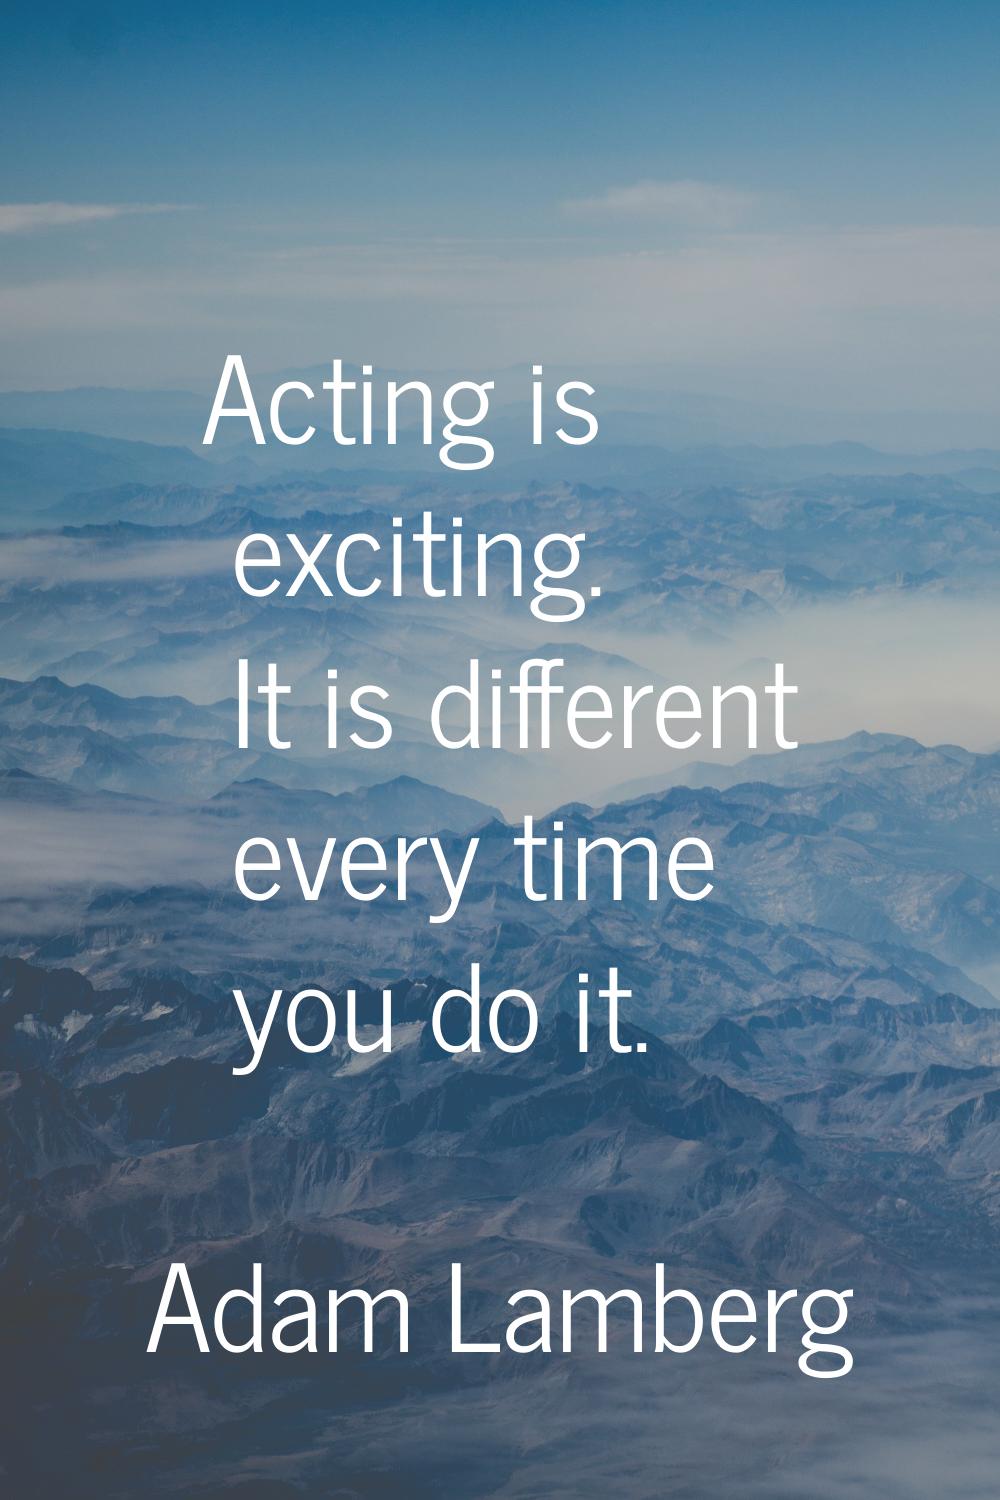 Acting is exciting. It is different every time you do it.